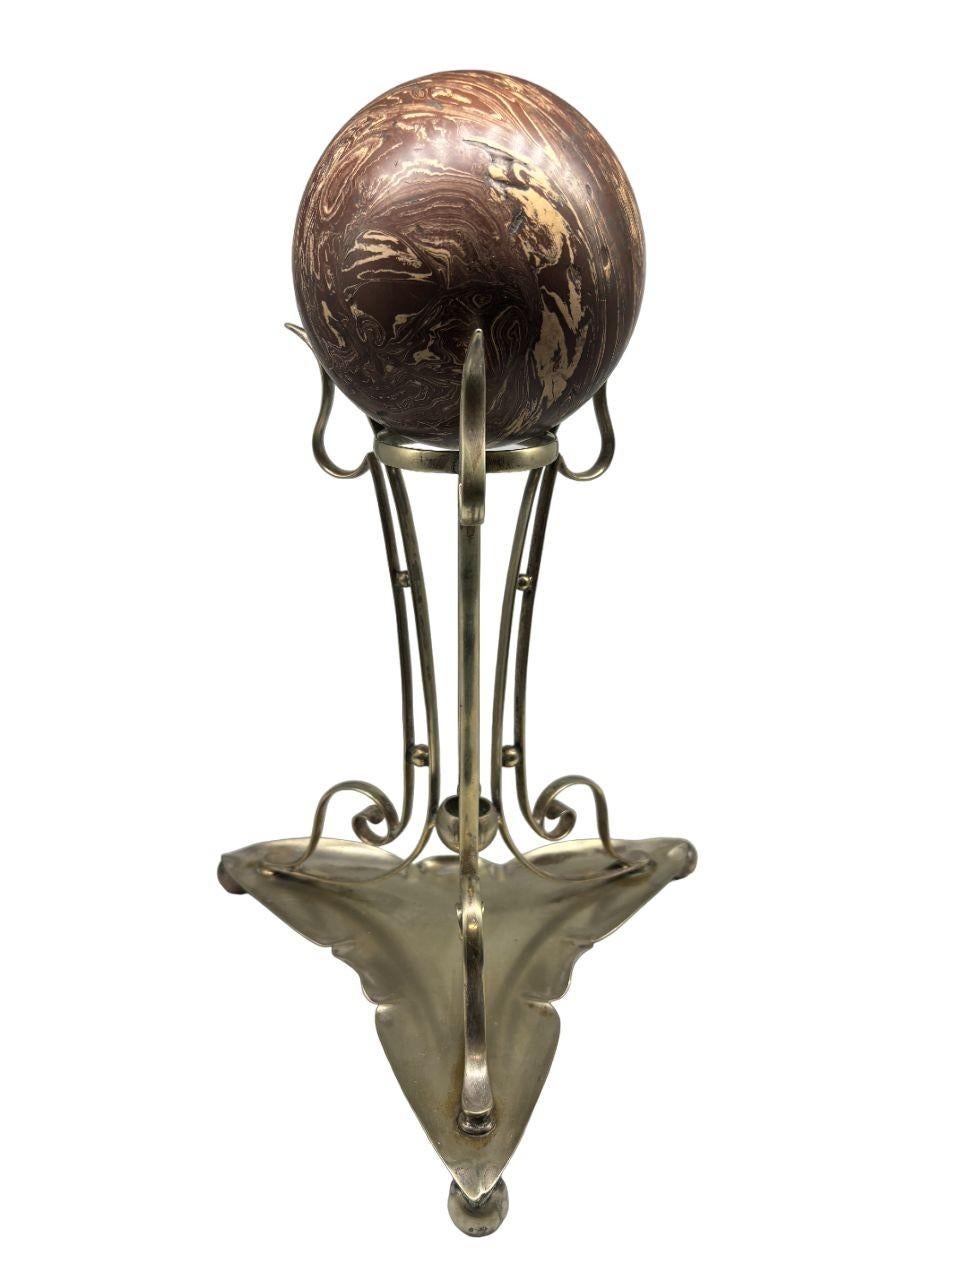 Introducing a charming piece of vintage decor: a silver-plated stand adorned with a Bakelite ball. This elegant stand exudes timeless sophistication, blending the lustrous allure of silver with the warmth of Bakelite. Perfect for adding a touch of